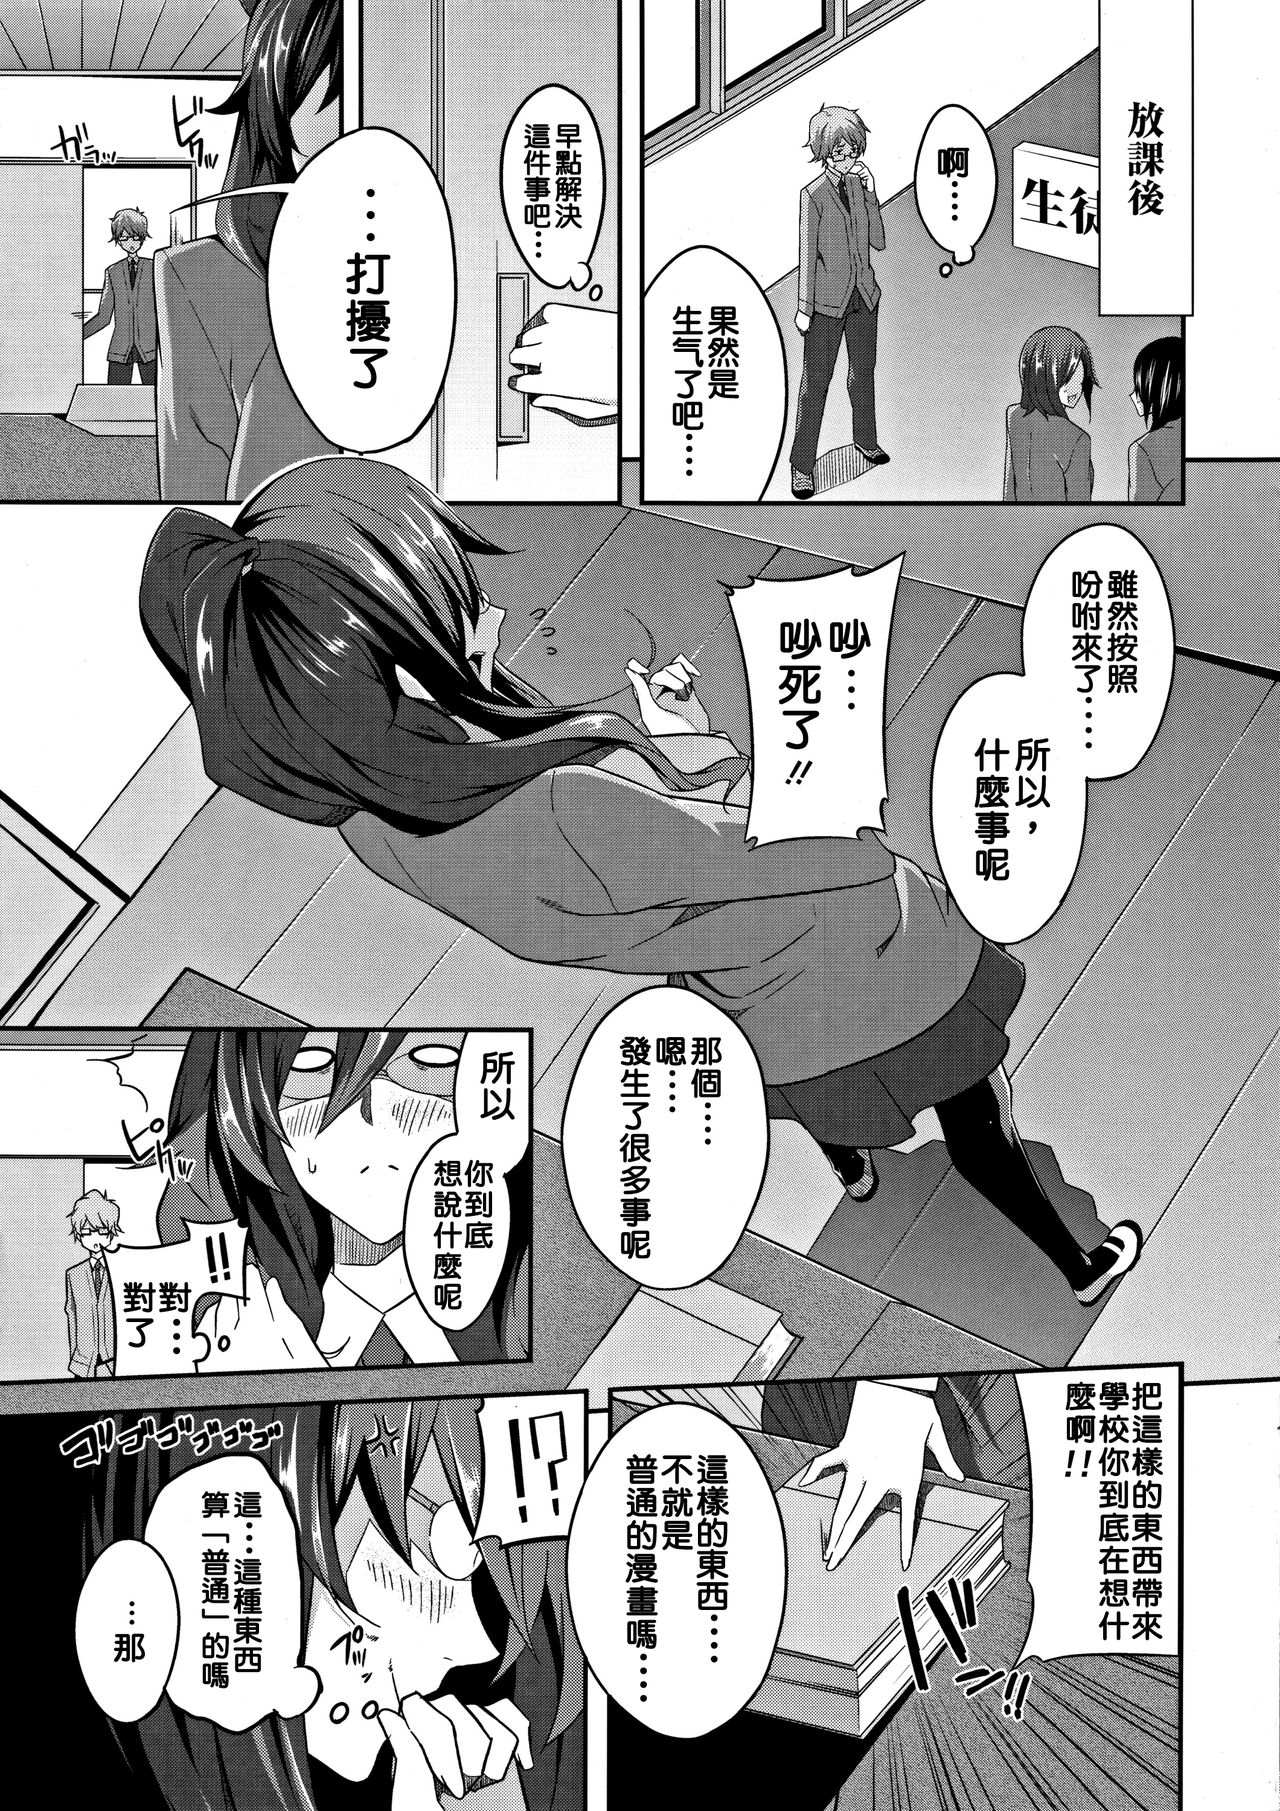 [Nanao] Cross You (Master_ Piece) [Chinese] [有猫还要什么男朋友汉化组] page 6 full